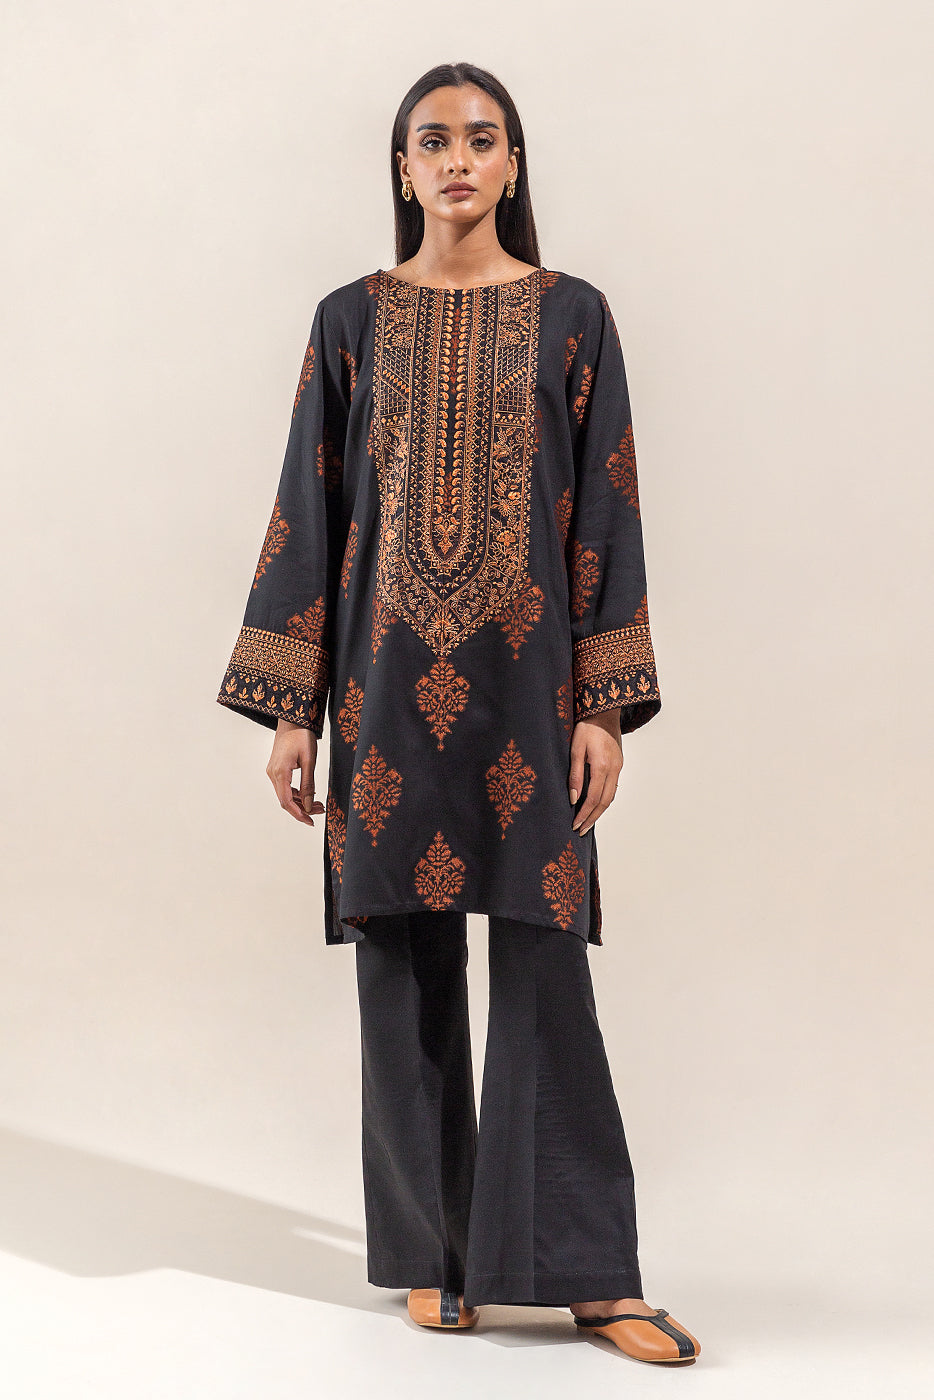 2 PIECE - EMBROIDERED JACQUARD SUIT - ONYX BRICK - BEECHTREE